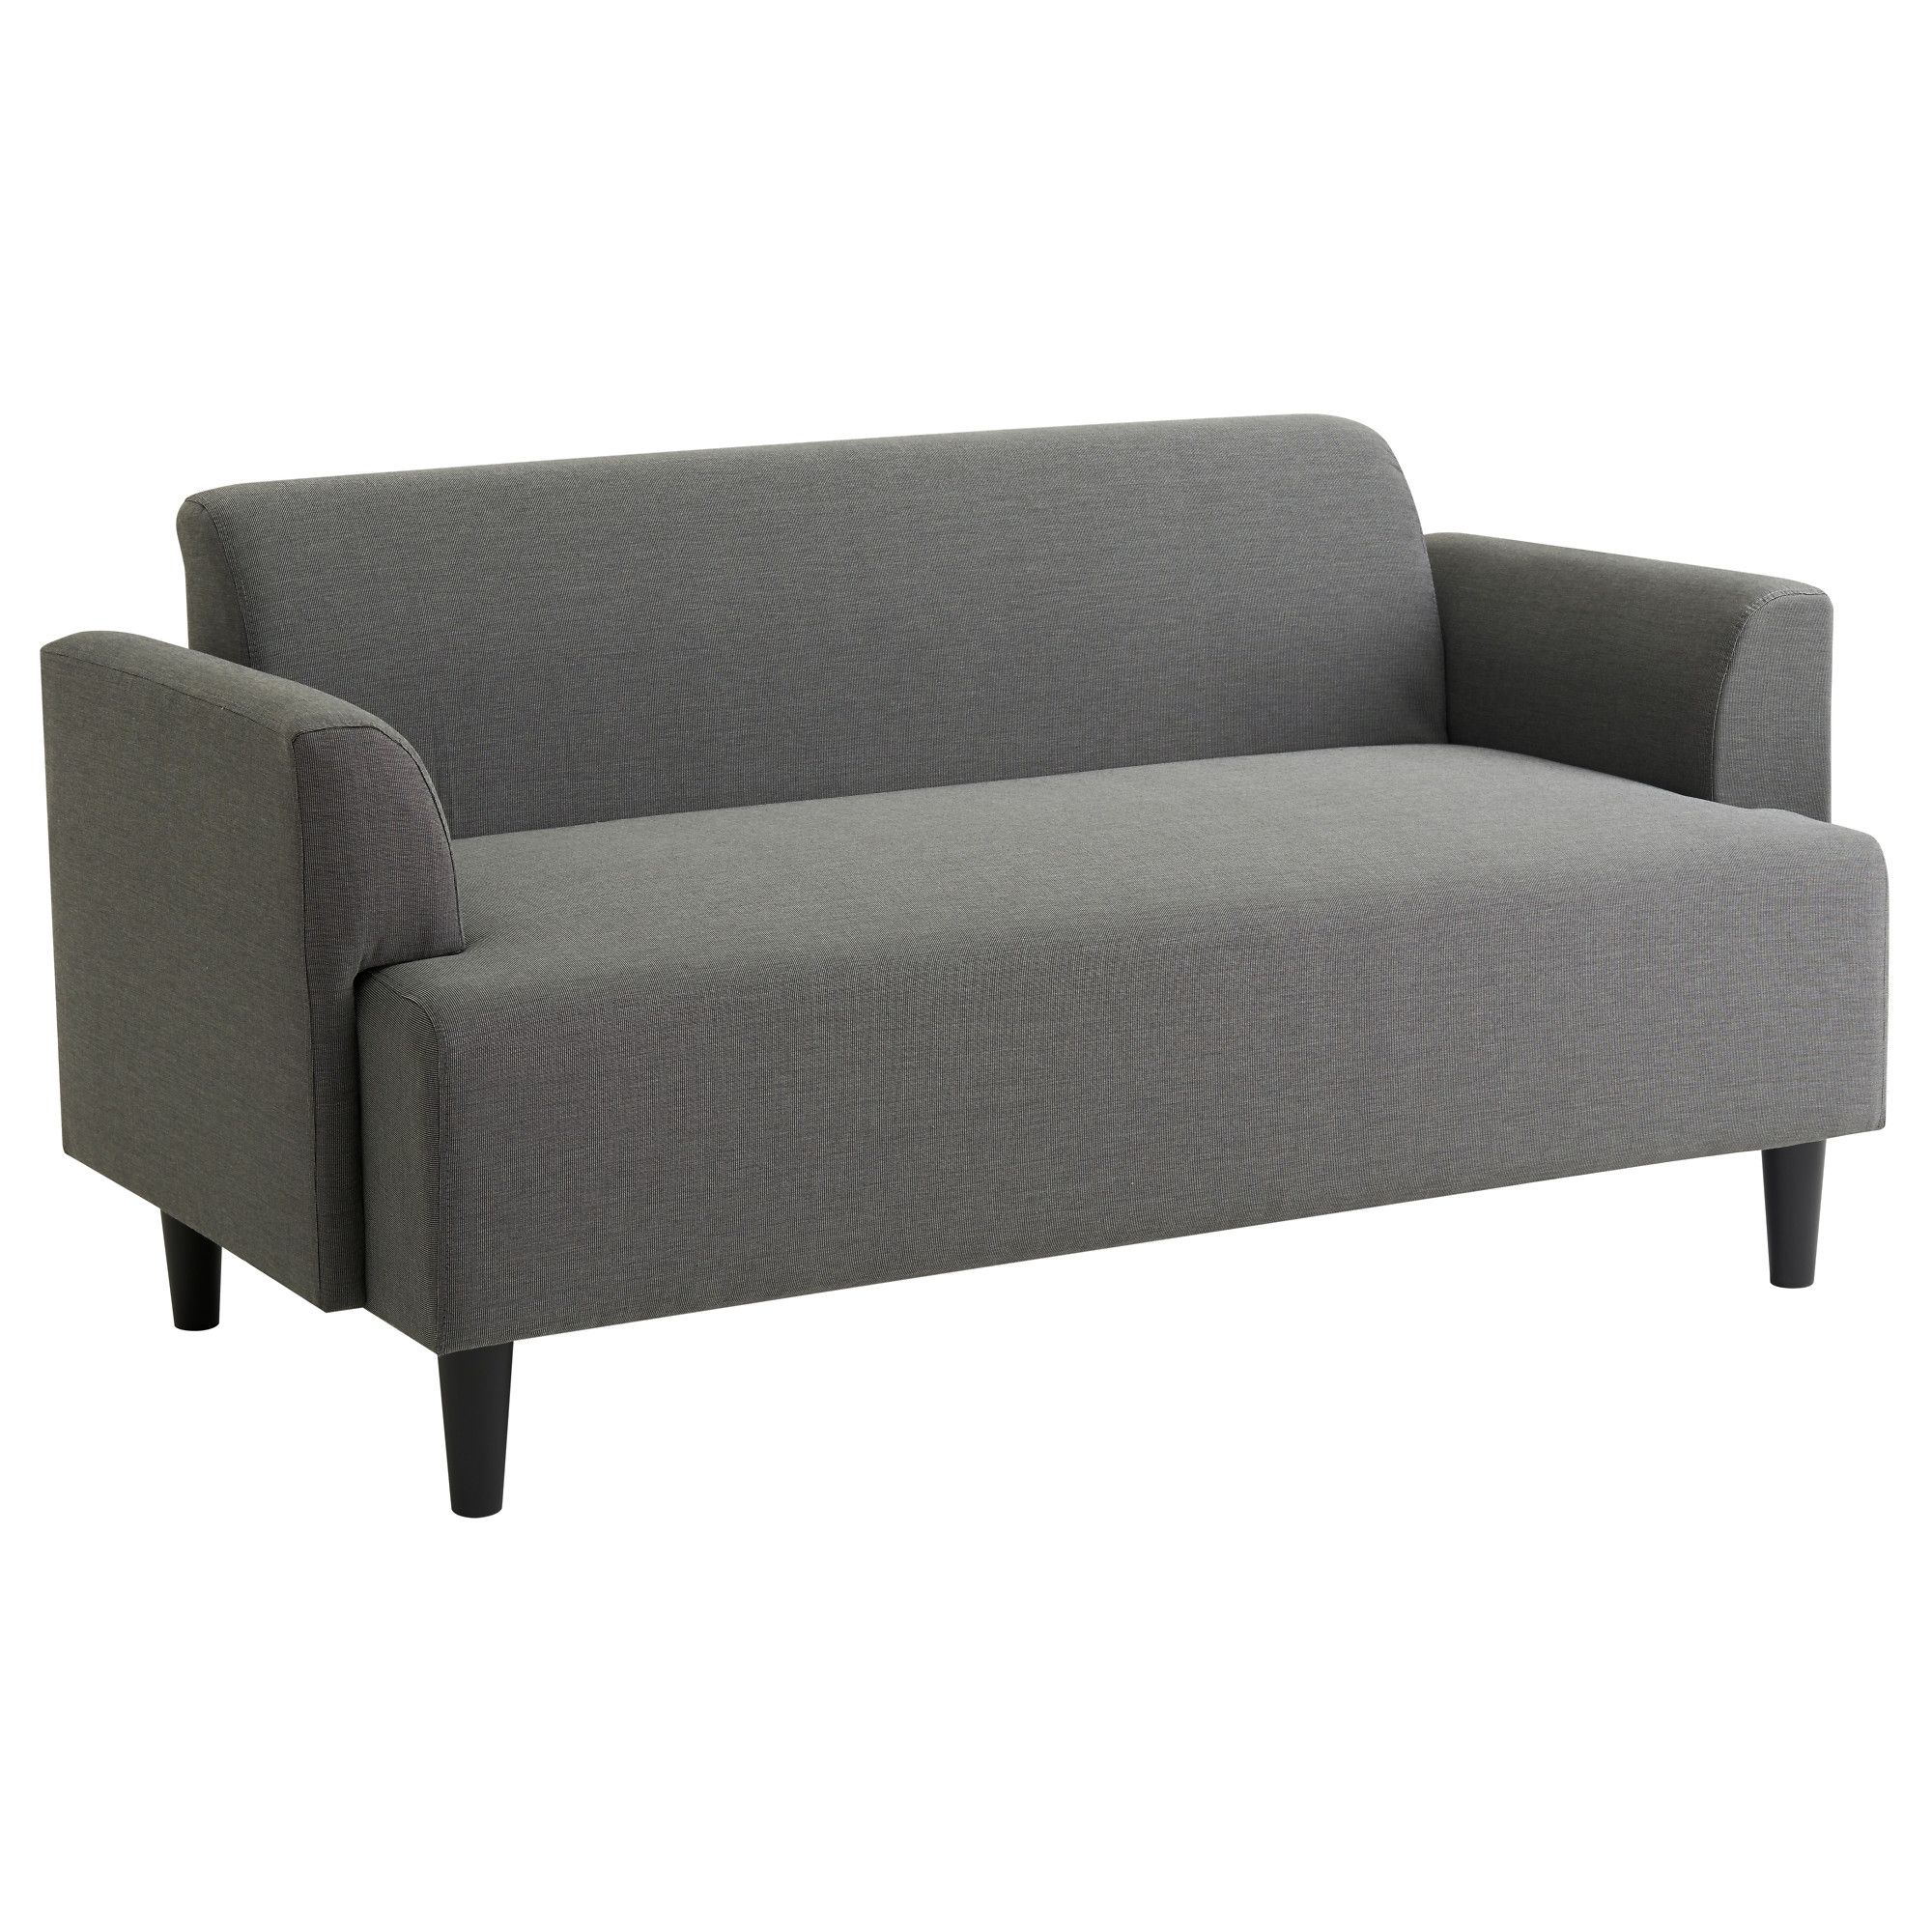 Most Recent Hemlingby Two Seat Sofa – Ikea With Ikea Two Seater Sofas (View 6 of 20)